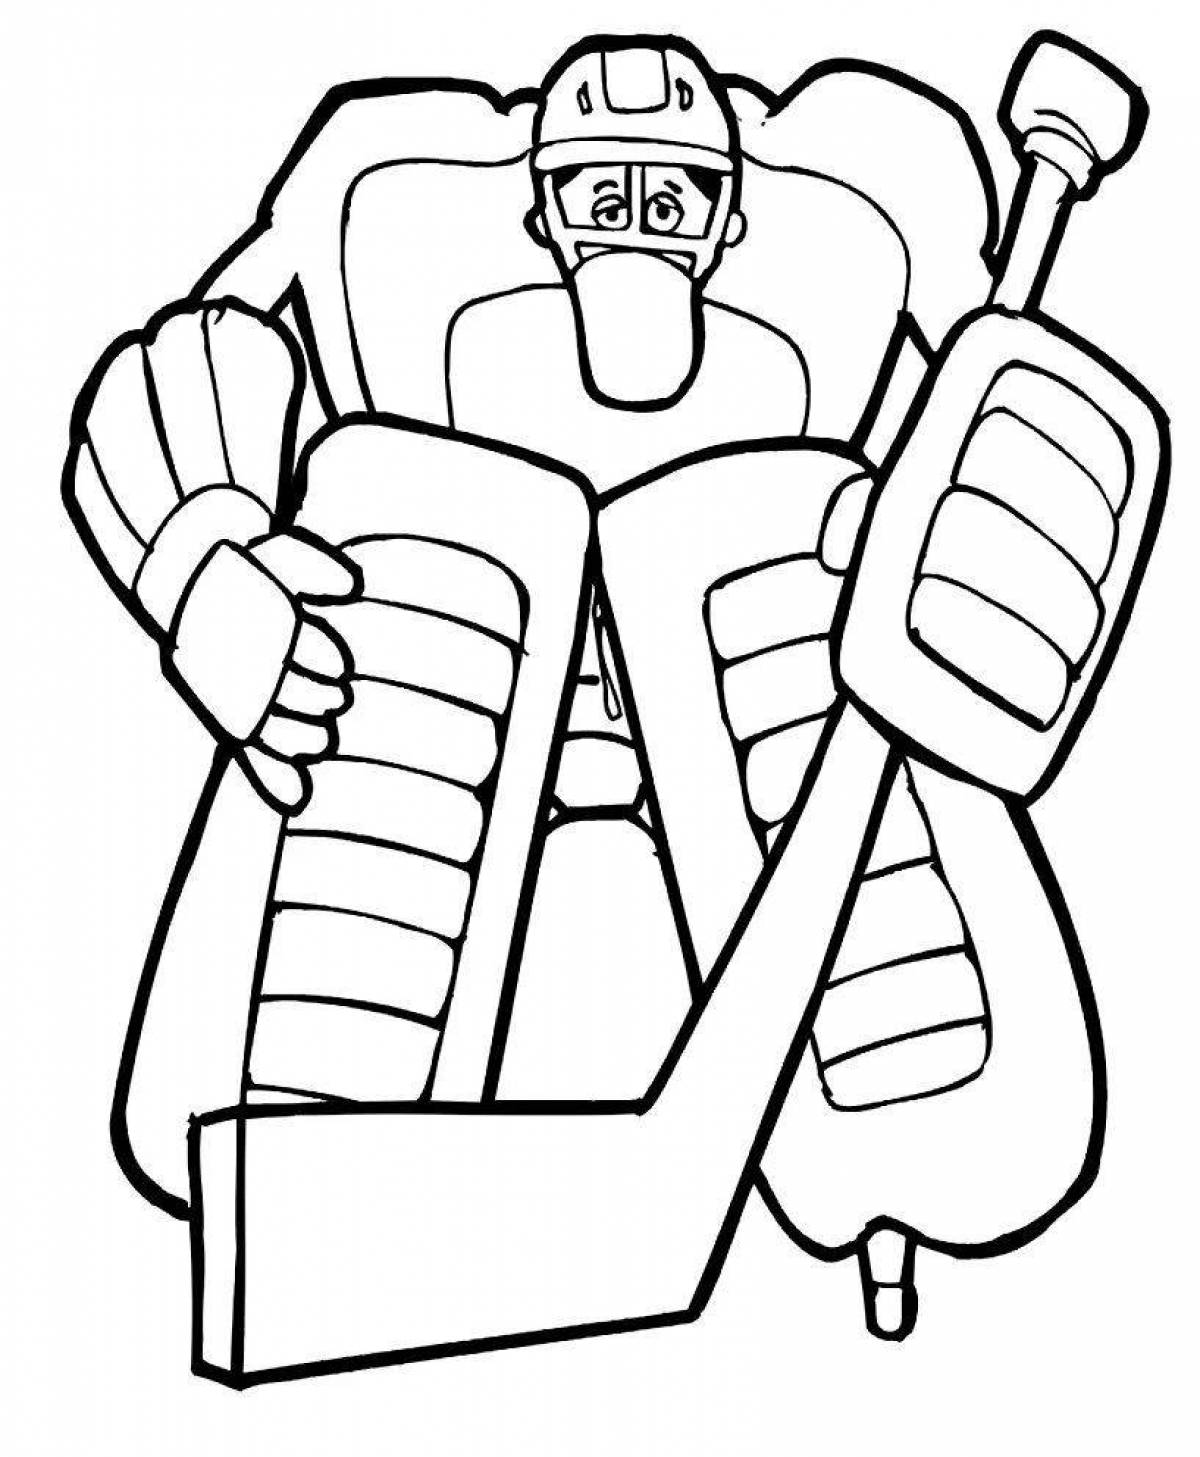 Adorable hockey coloring book from voice book